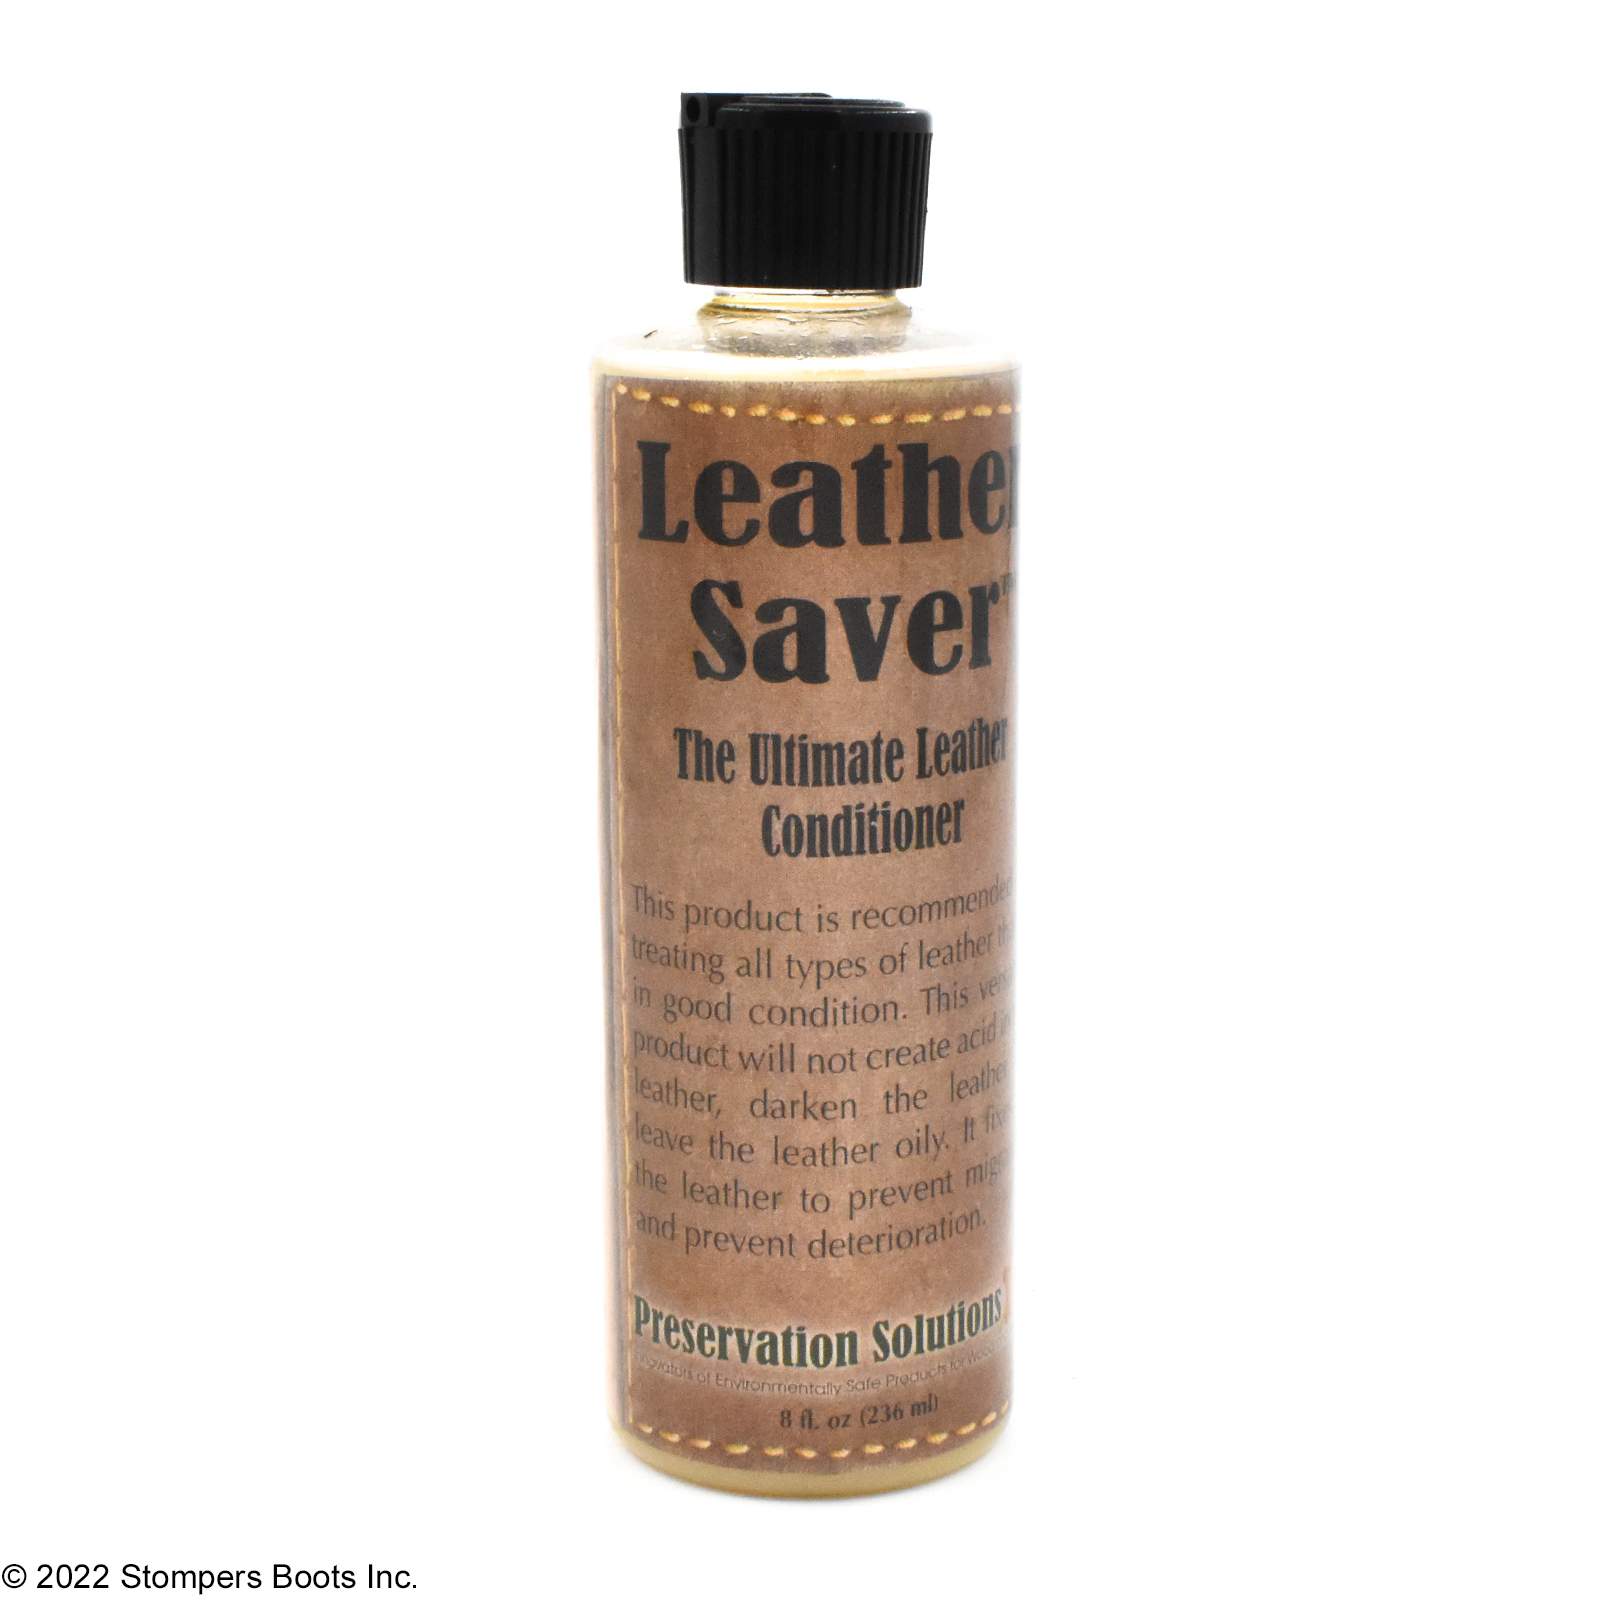 The Ultimate Leather Conditioner